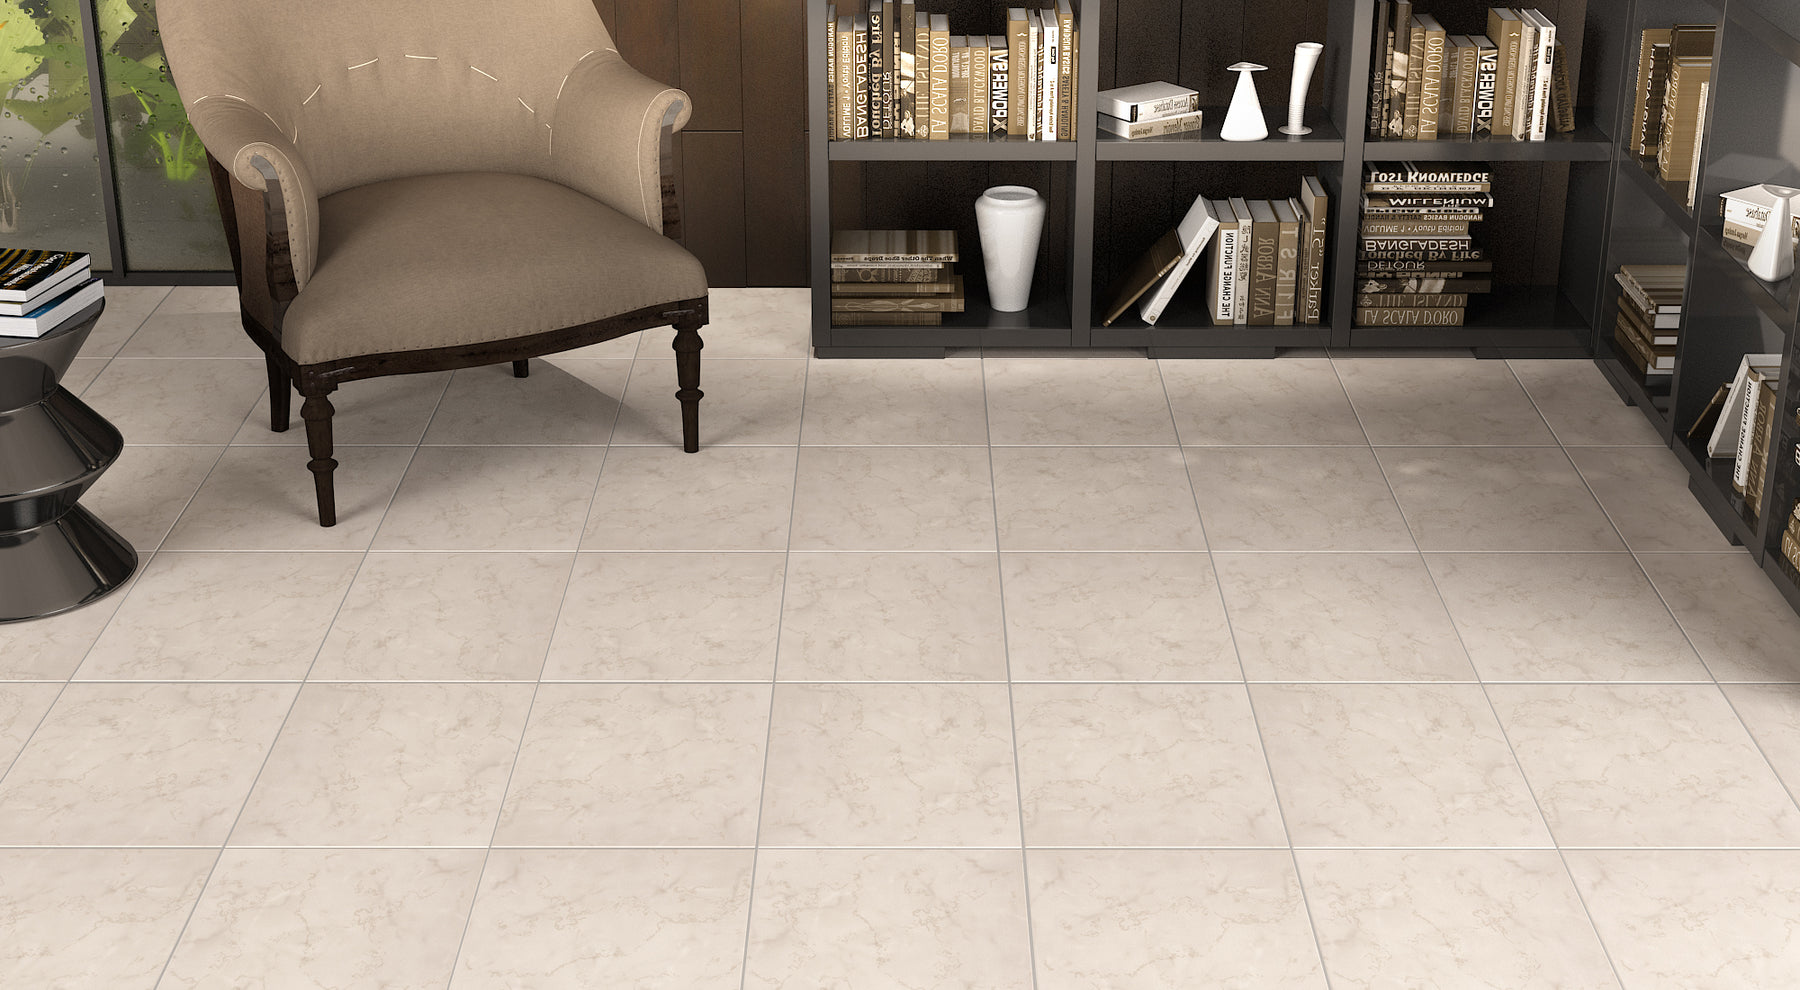 How to Choose the Right Size Tile